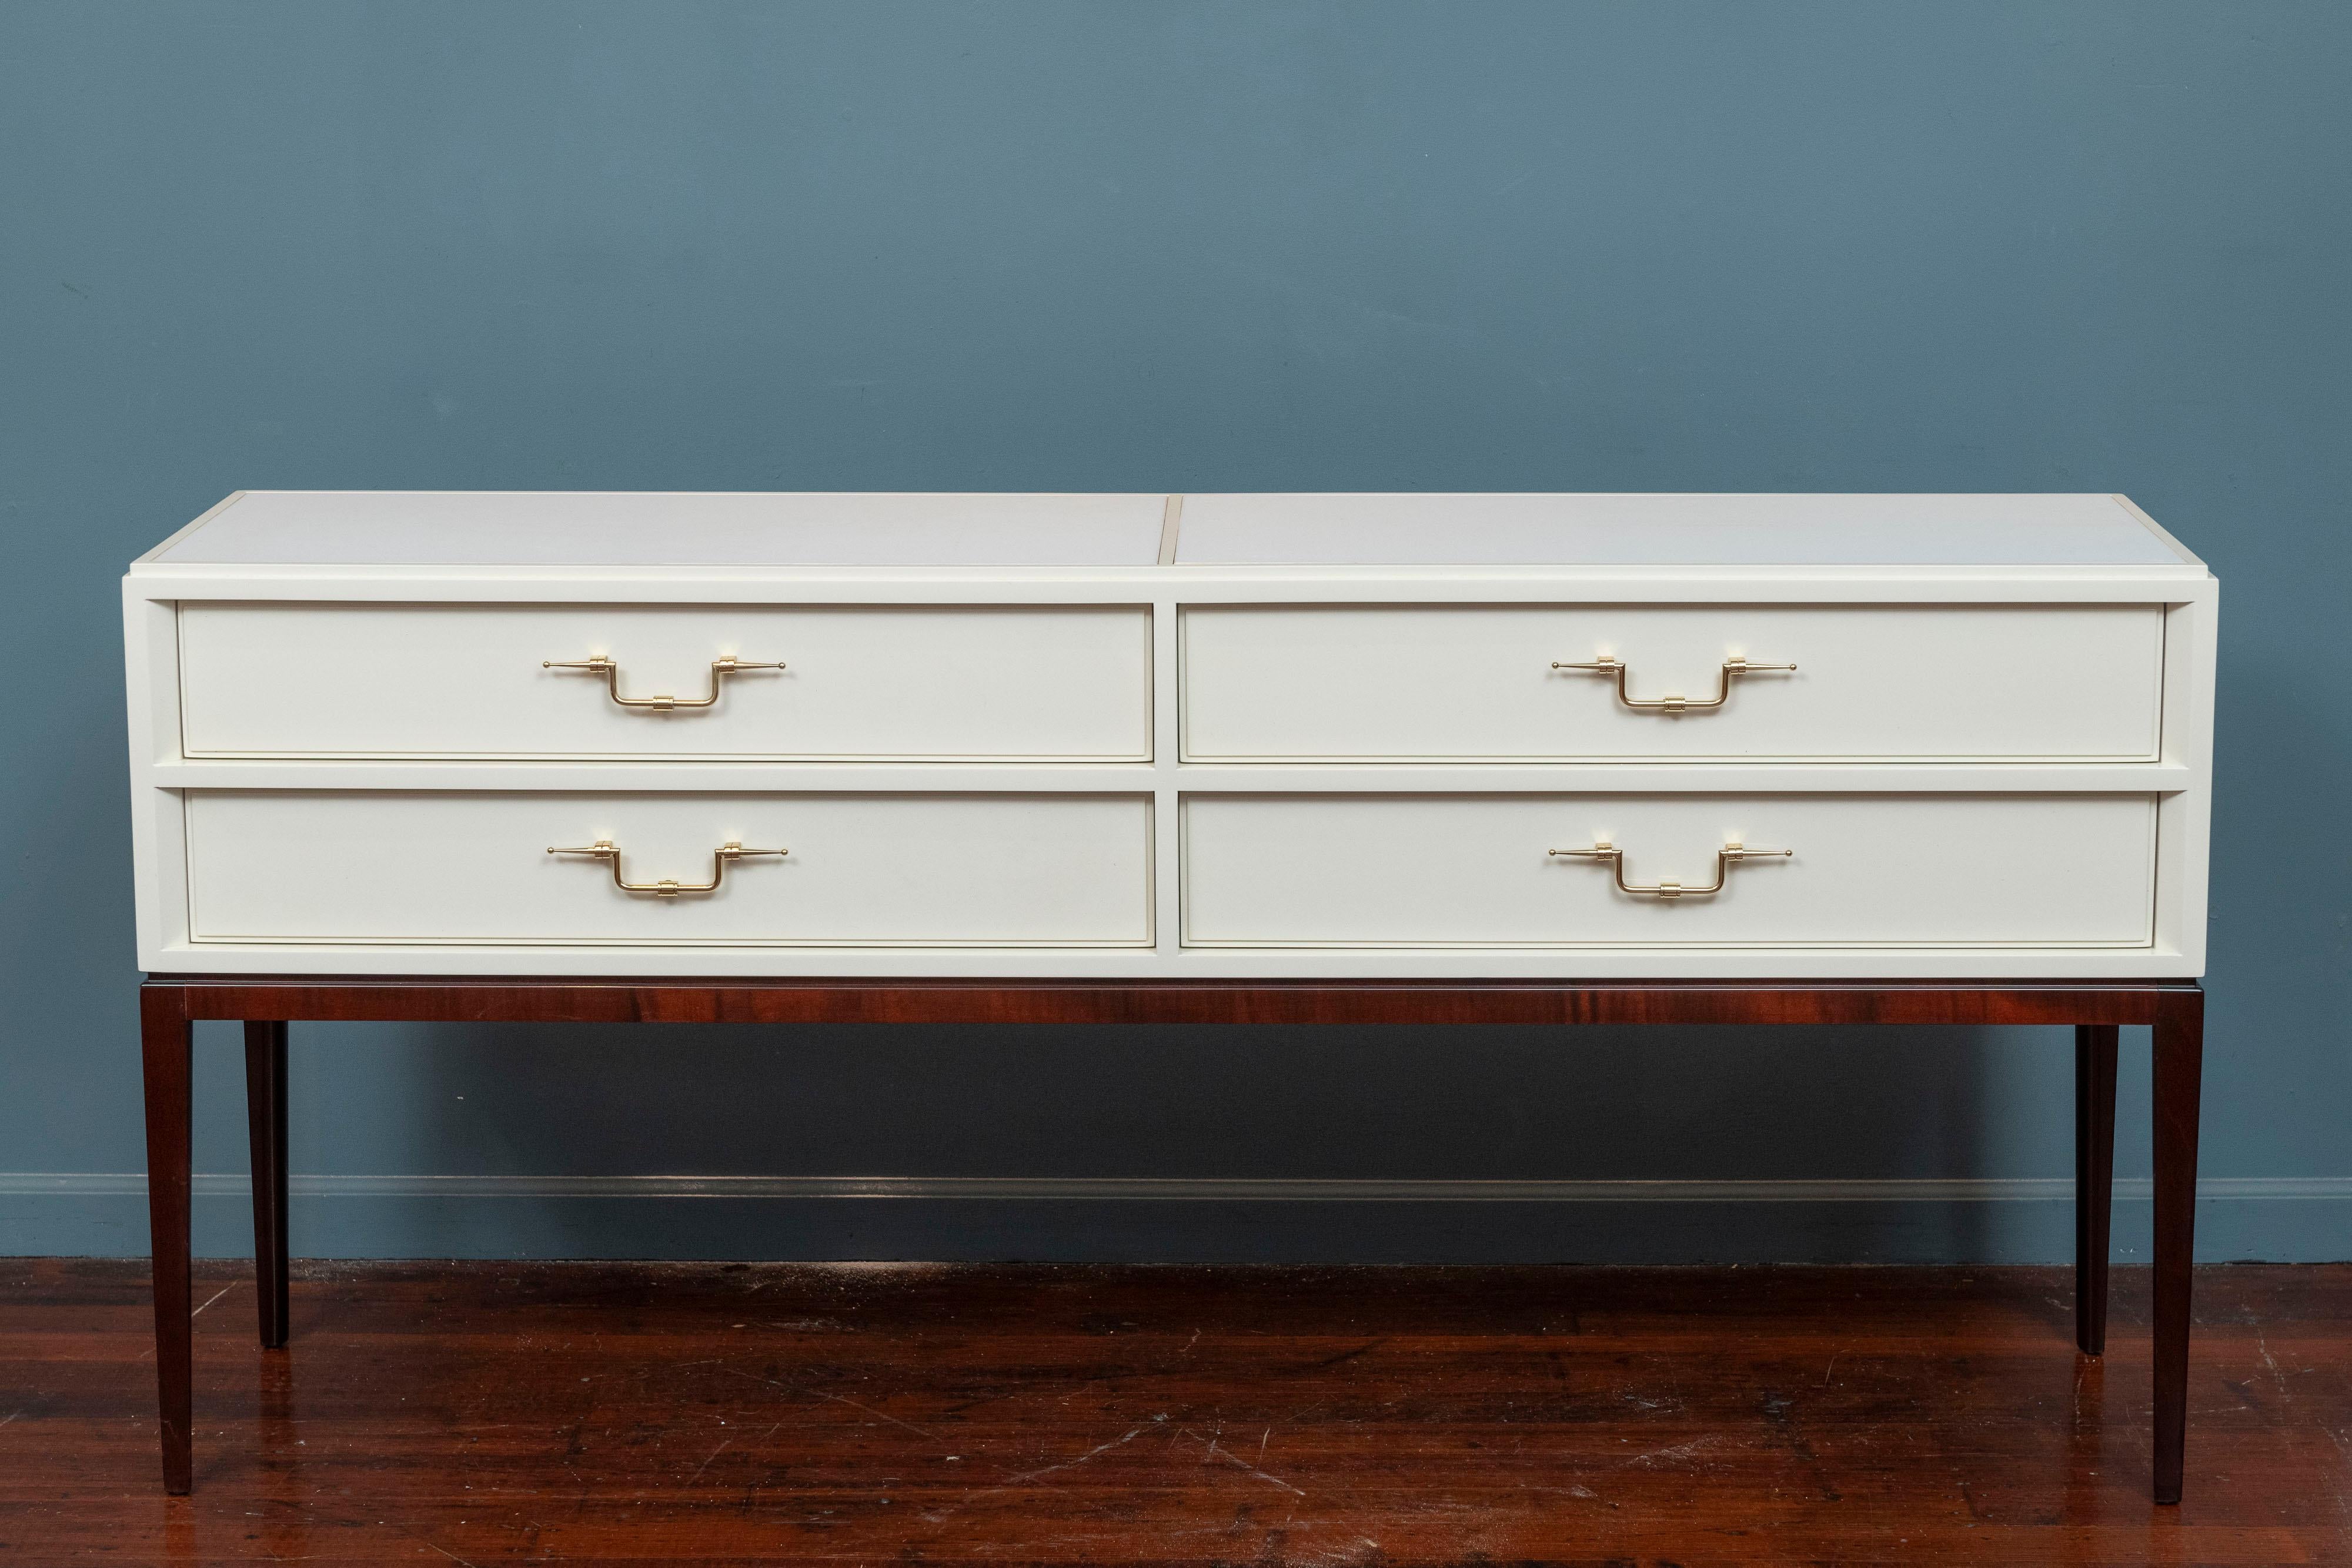 Tommi Parzinger Originals console table or small credenza. Sophisticated modernism executed in Spanish white lacquer on a dark mahogany stained base with polished brass hardware. Featuring four large drawers and two inset milk glass sections in the